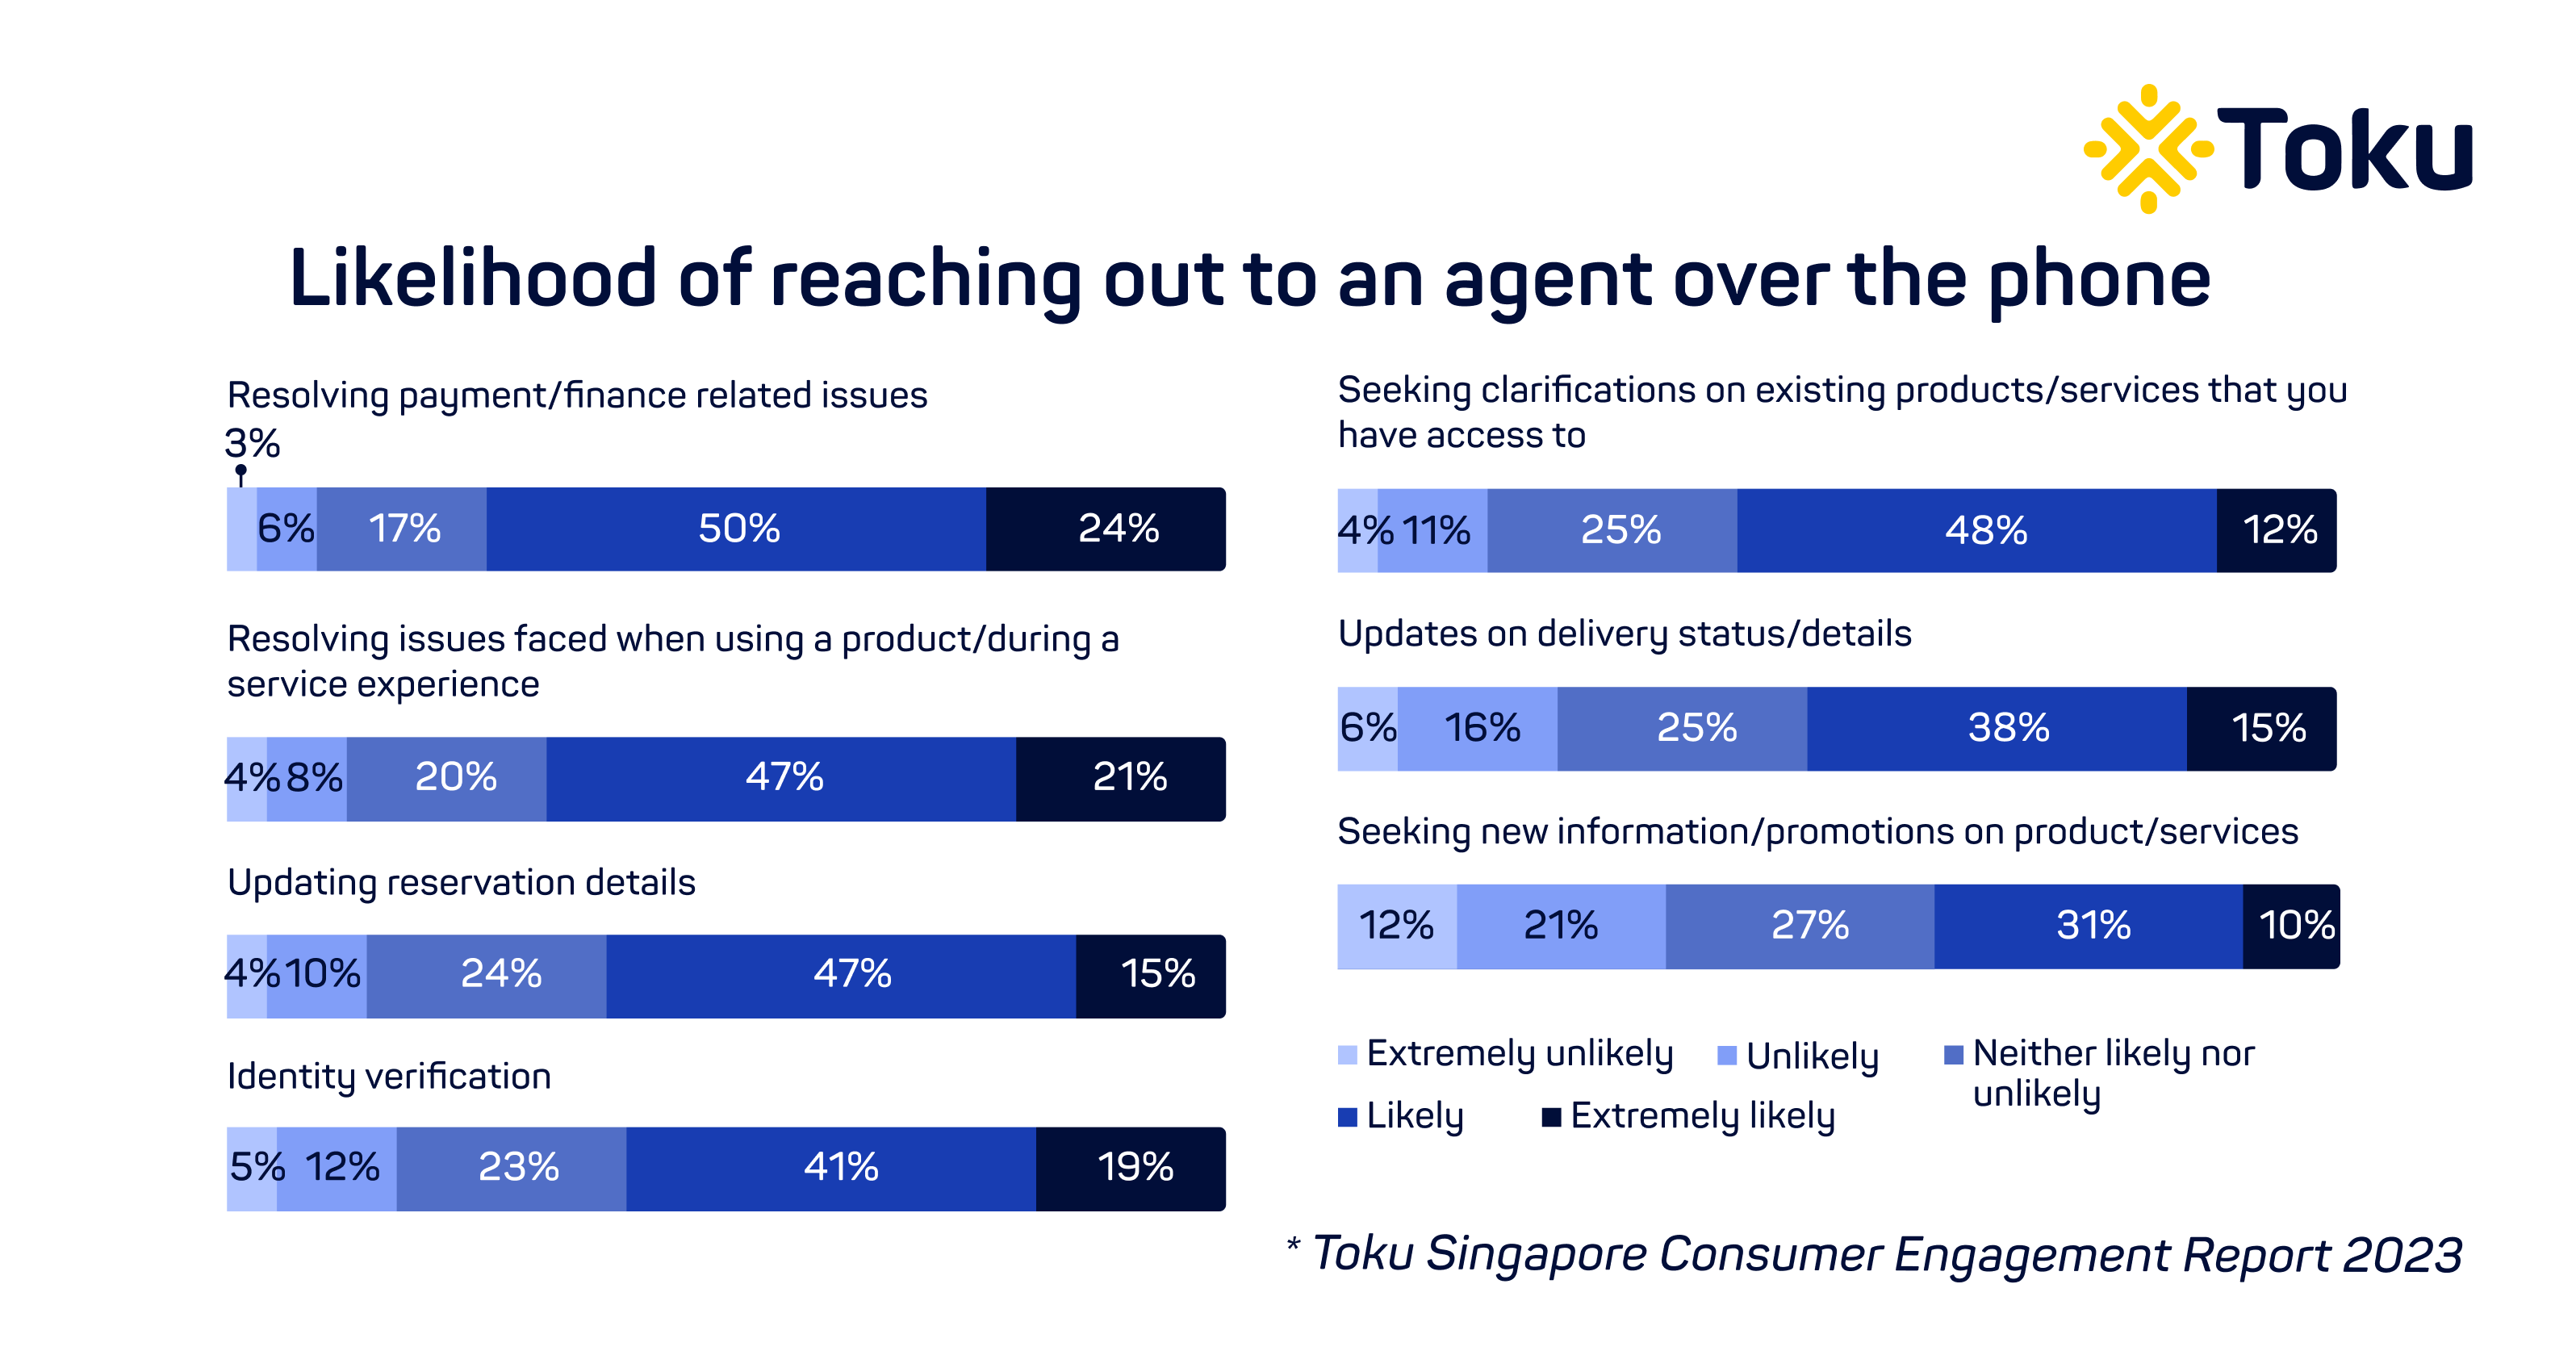 2023 Likelihood of reaching out to an agent over the phone